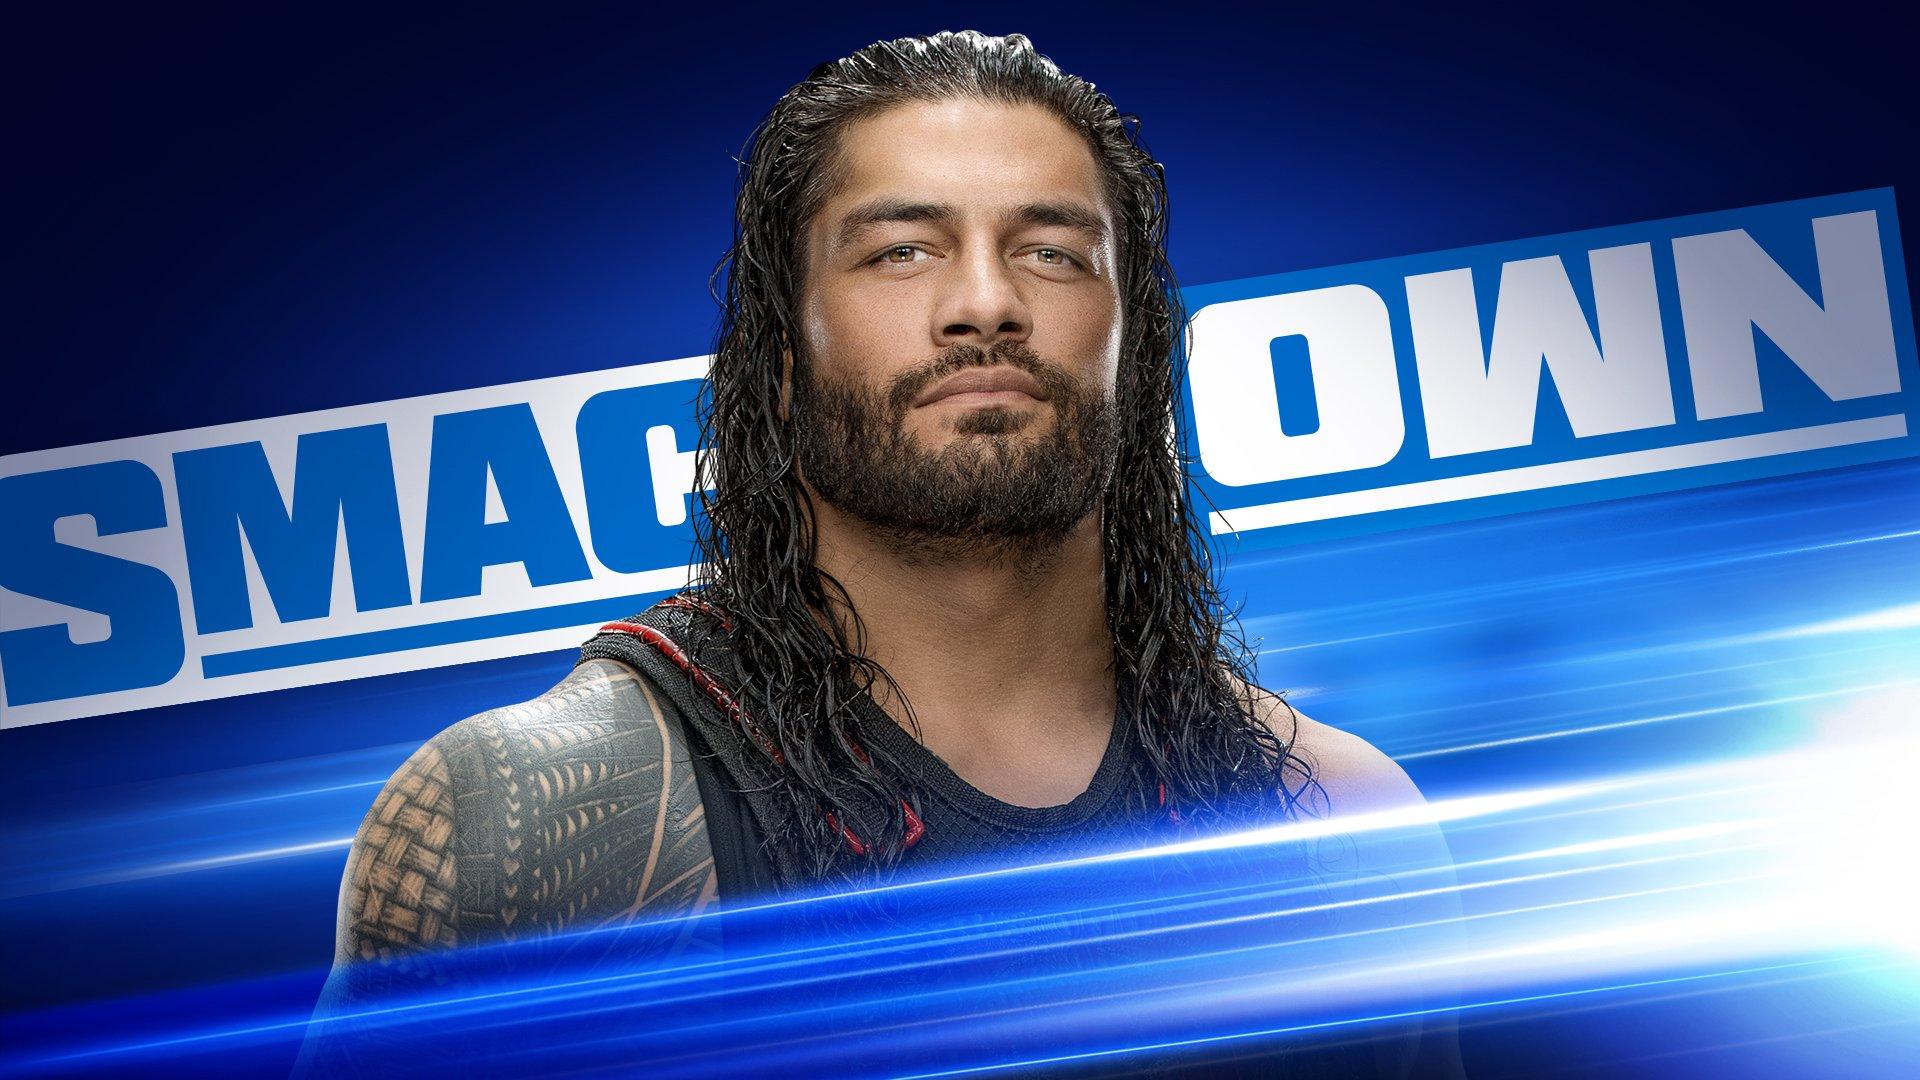 WWE Friday Night SmackDown Results – December 13th, 2019